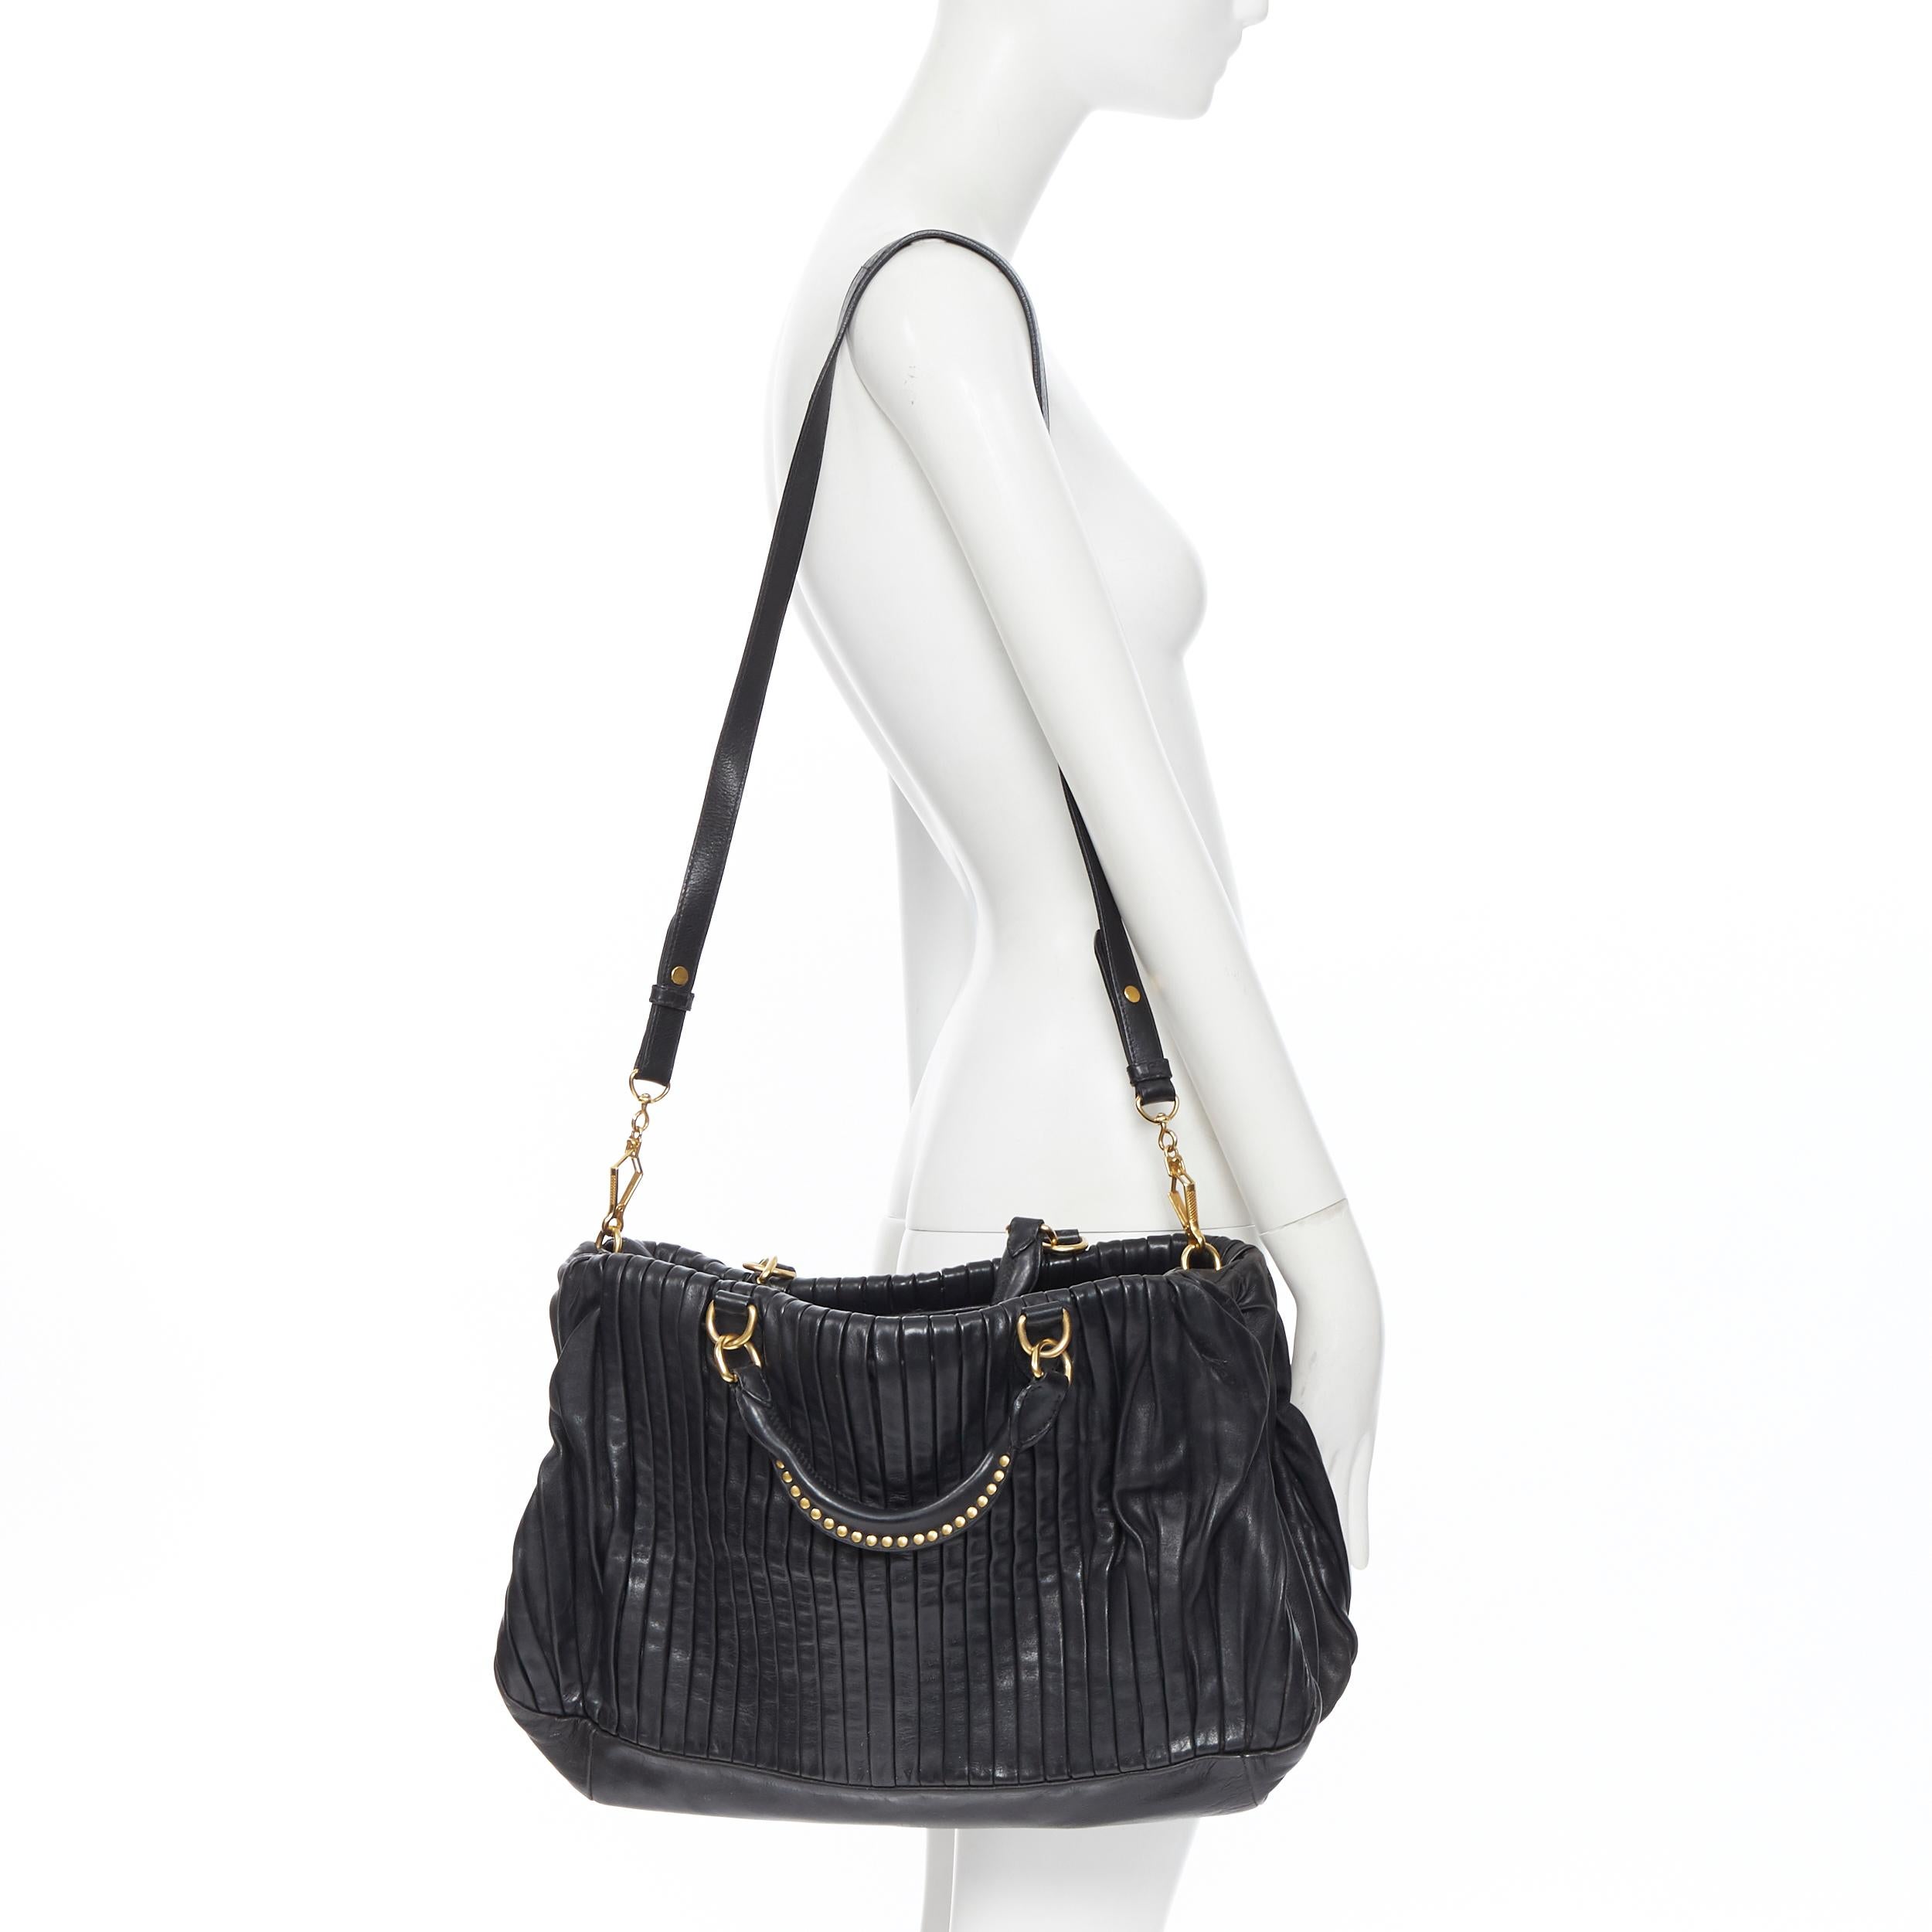 MIU MIU black pleated leather gold studded handle top zip shoulder strap bag
Brand: Miu Miu 
Model Name / Style: Pleated leather bag
Material: Leather
Color: Black
Pattern: Solid
Closure: Zip
Extra Detail: Removable shoulder strap. Studded rolled